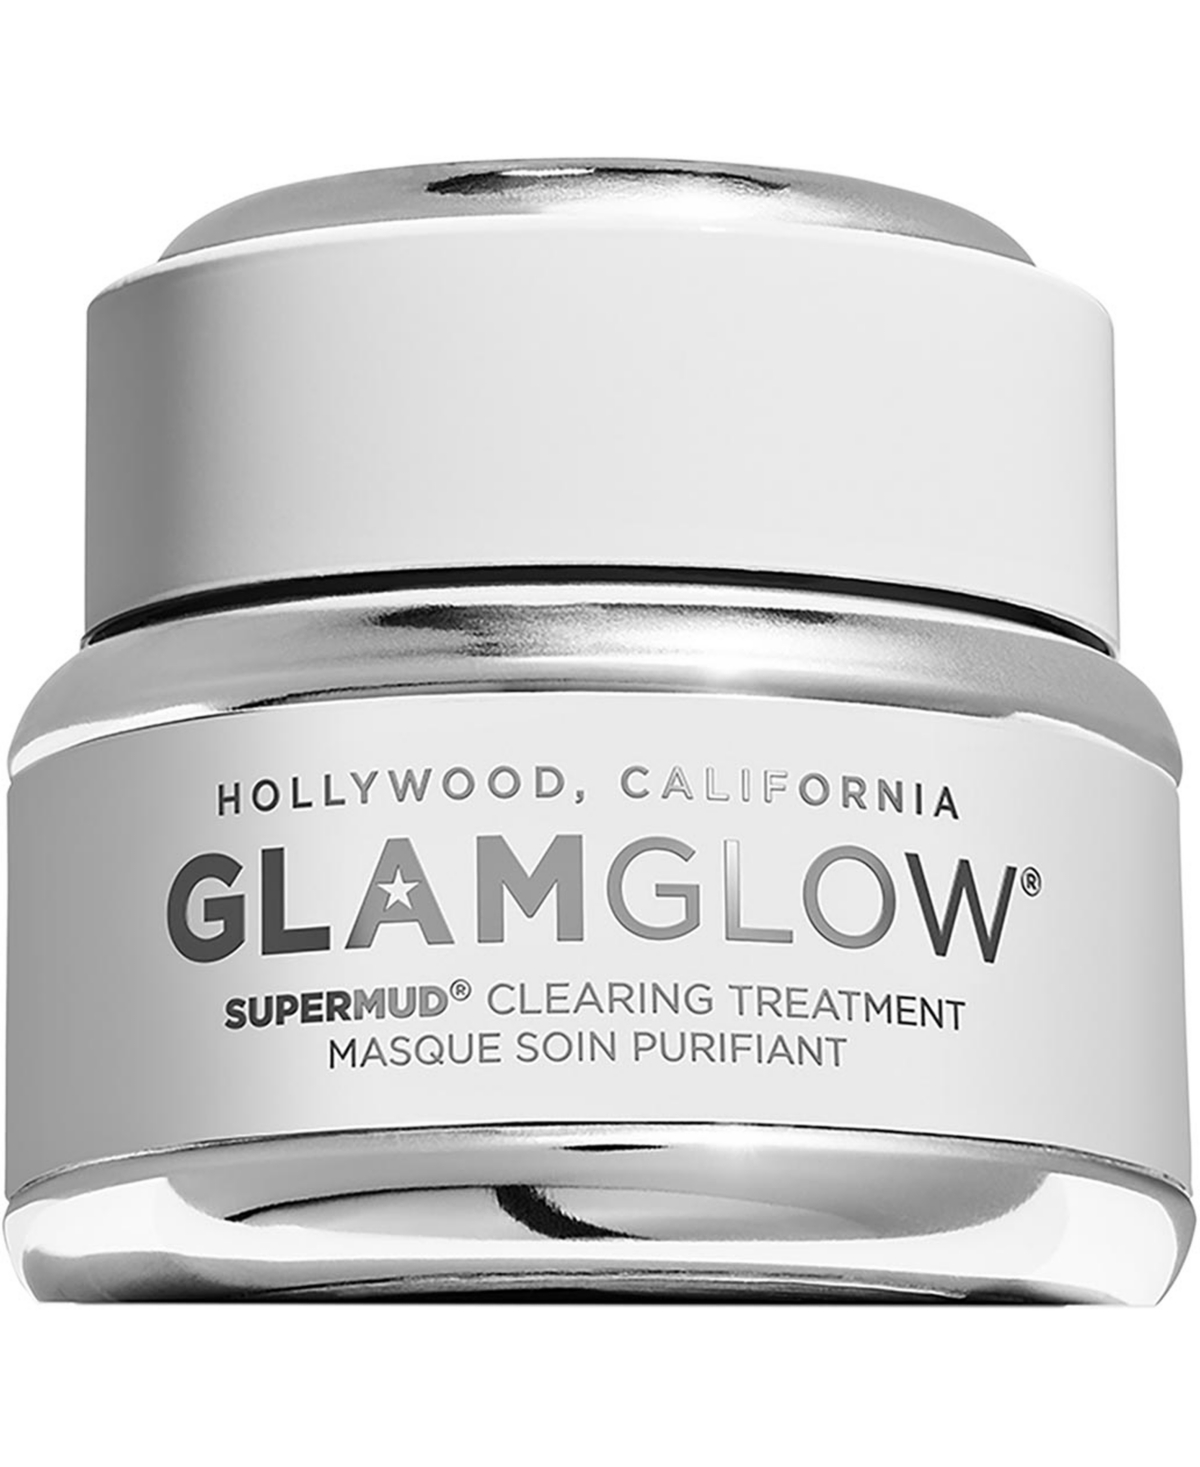 Glamglow Supermud Clearing Treatment Mask, 0.5-oz.